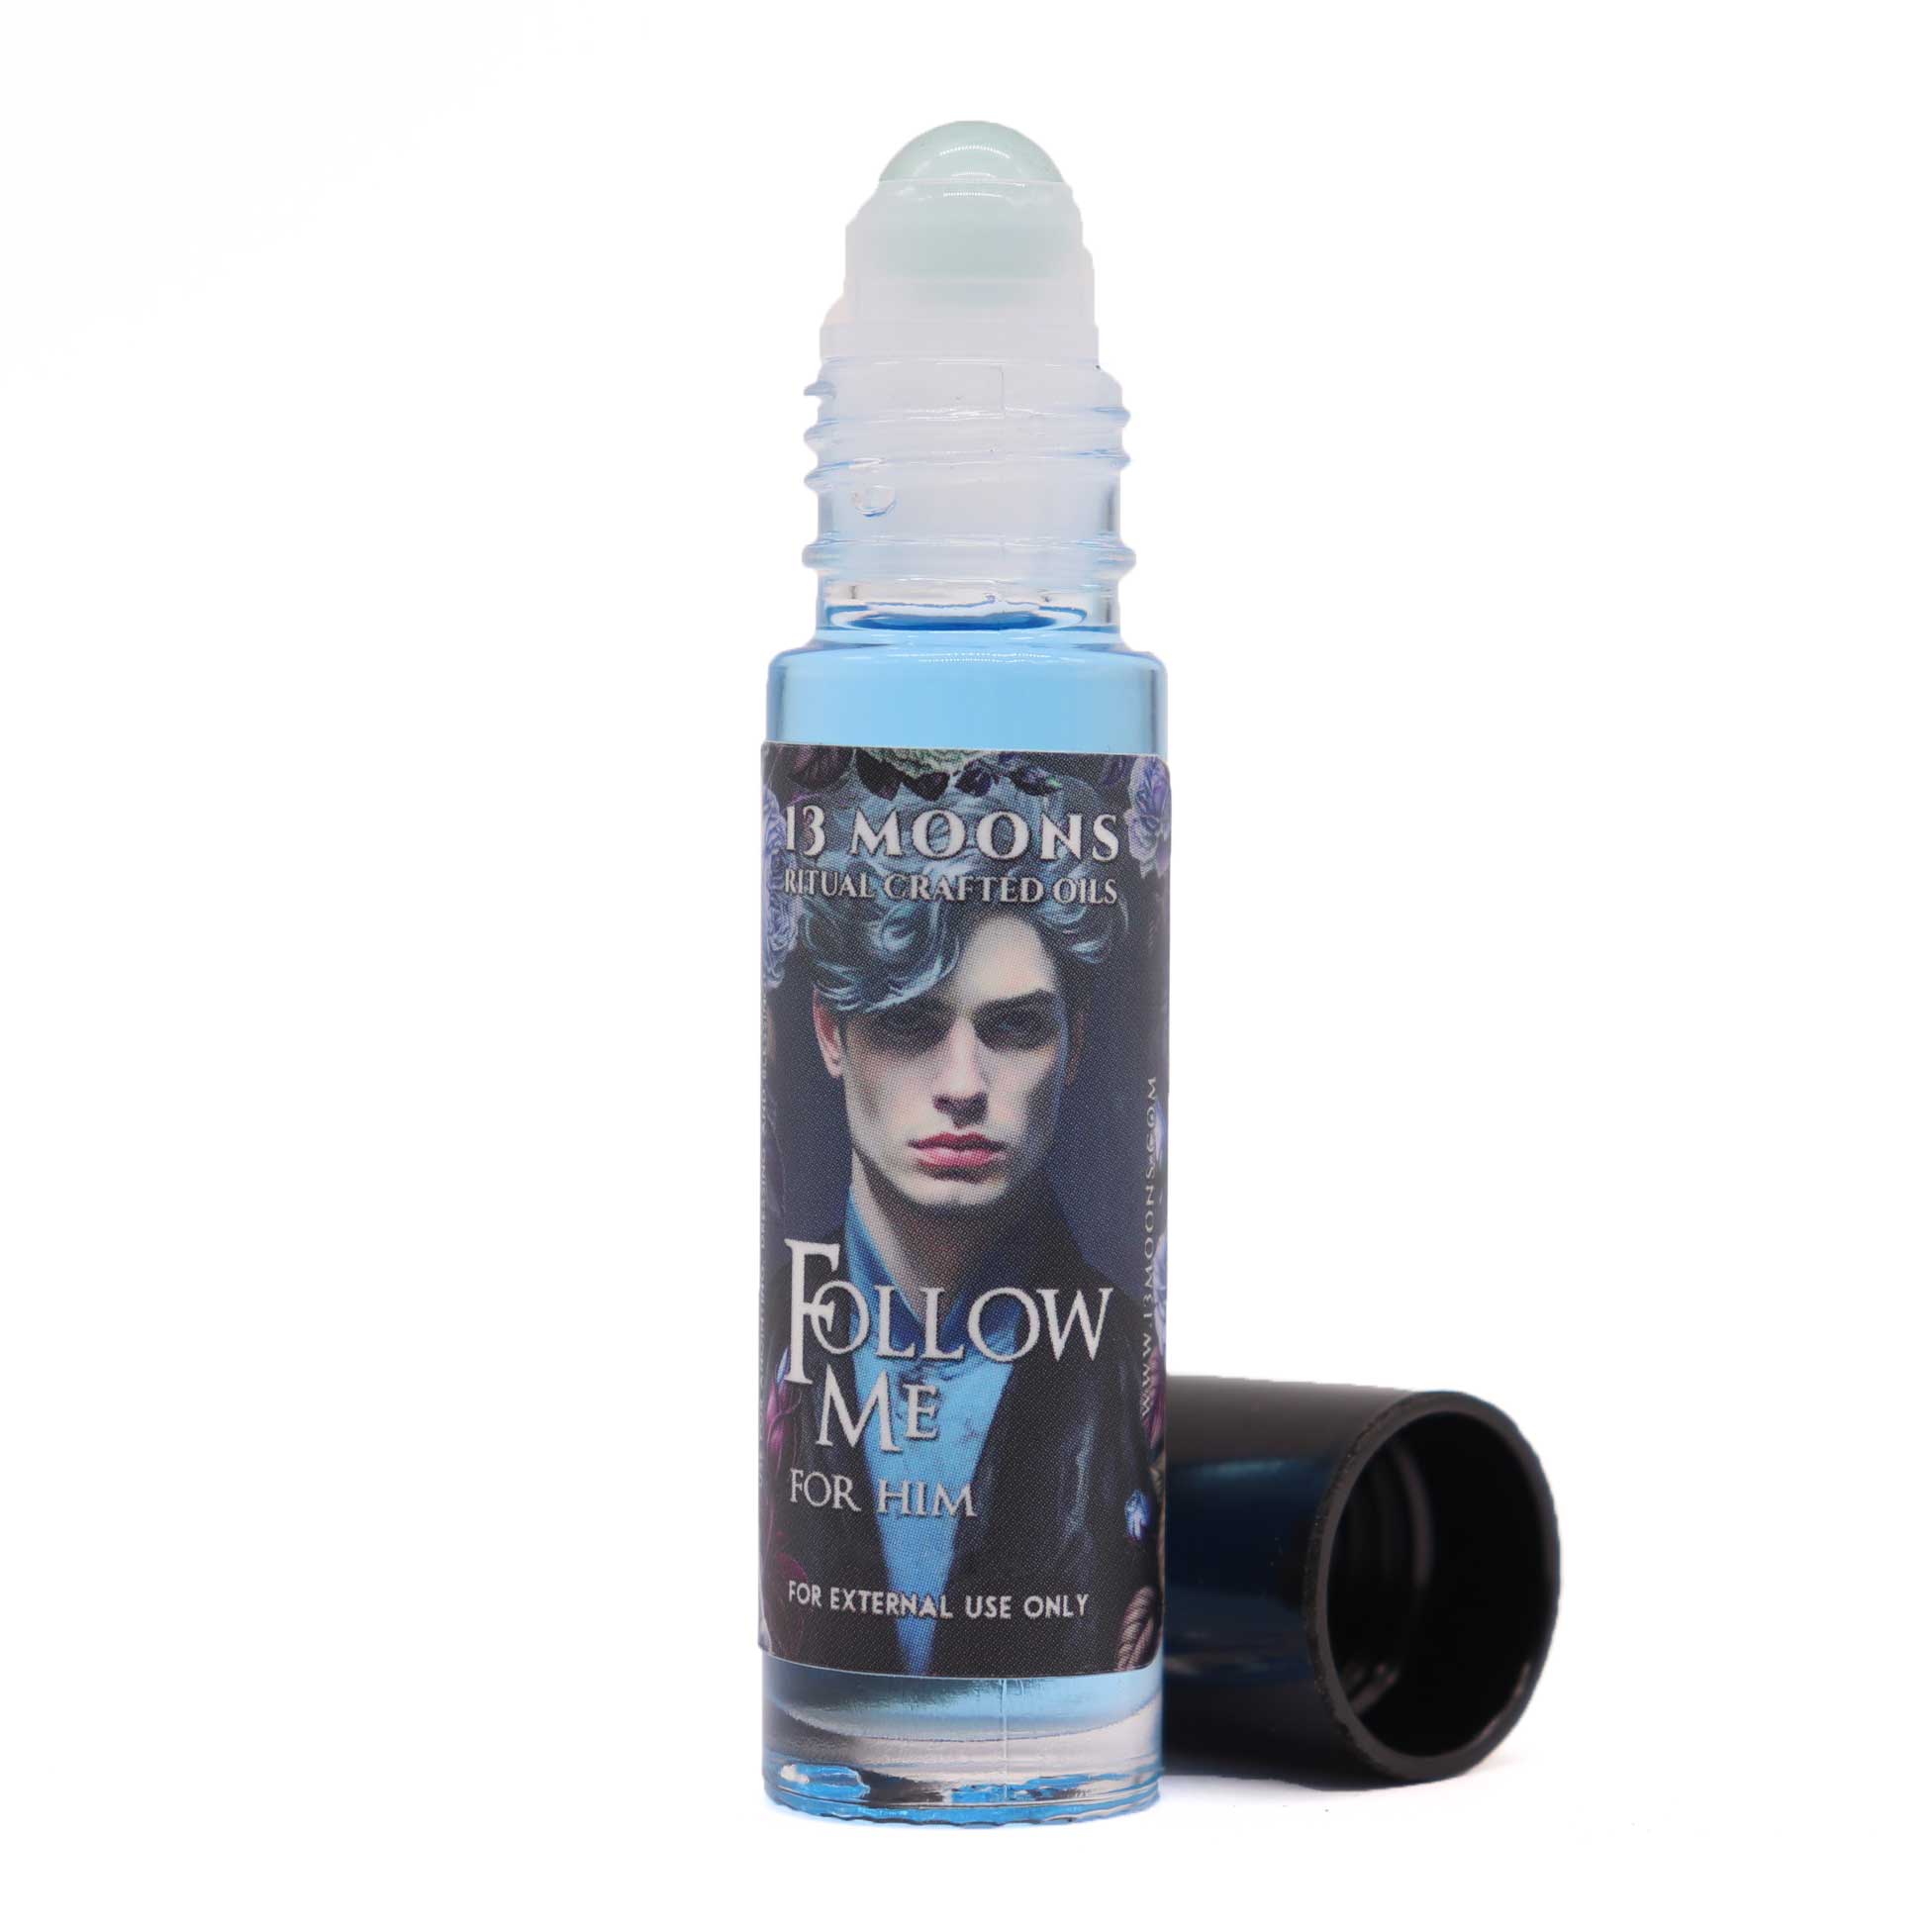 Follow Me for Him Ritual Crafted Oil by 13 Moons - 13 Moons